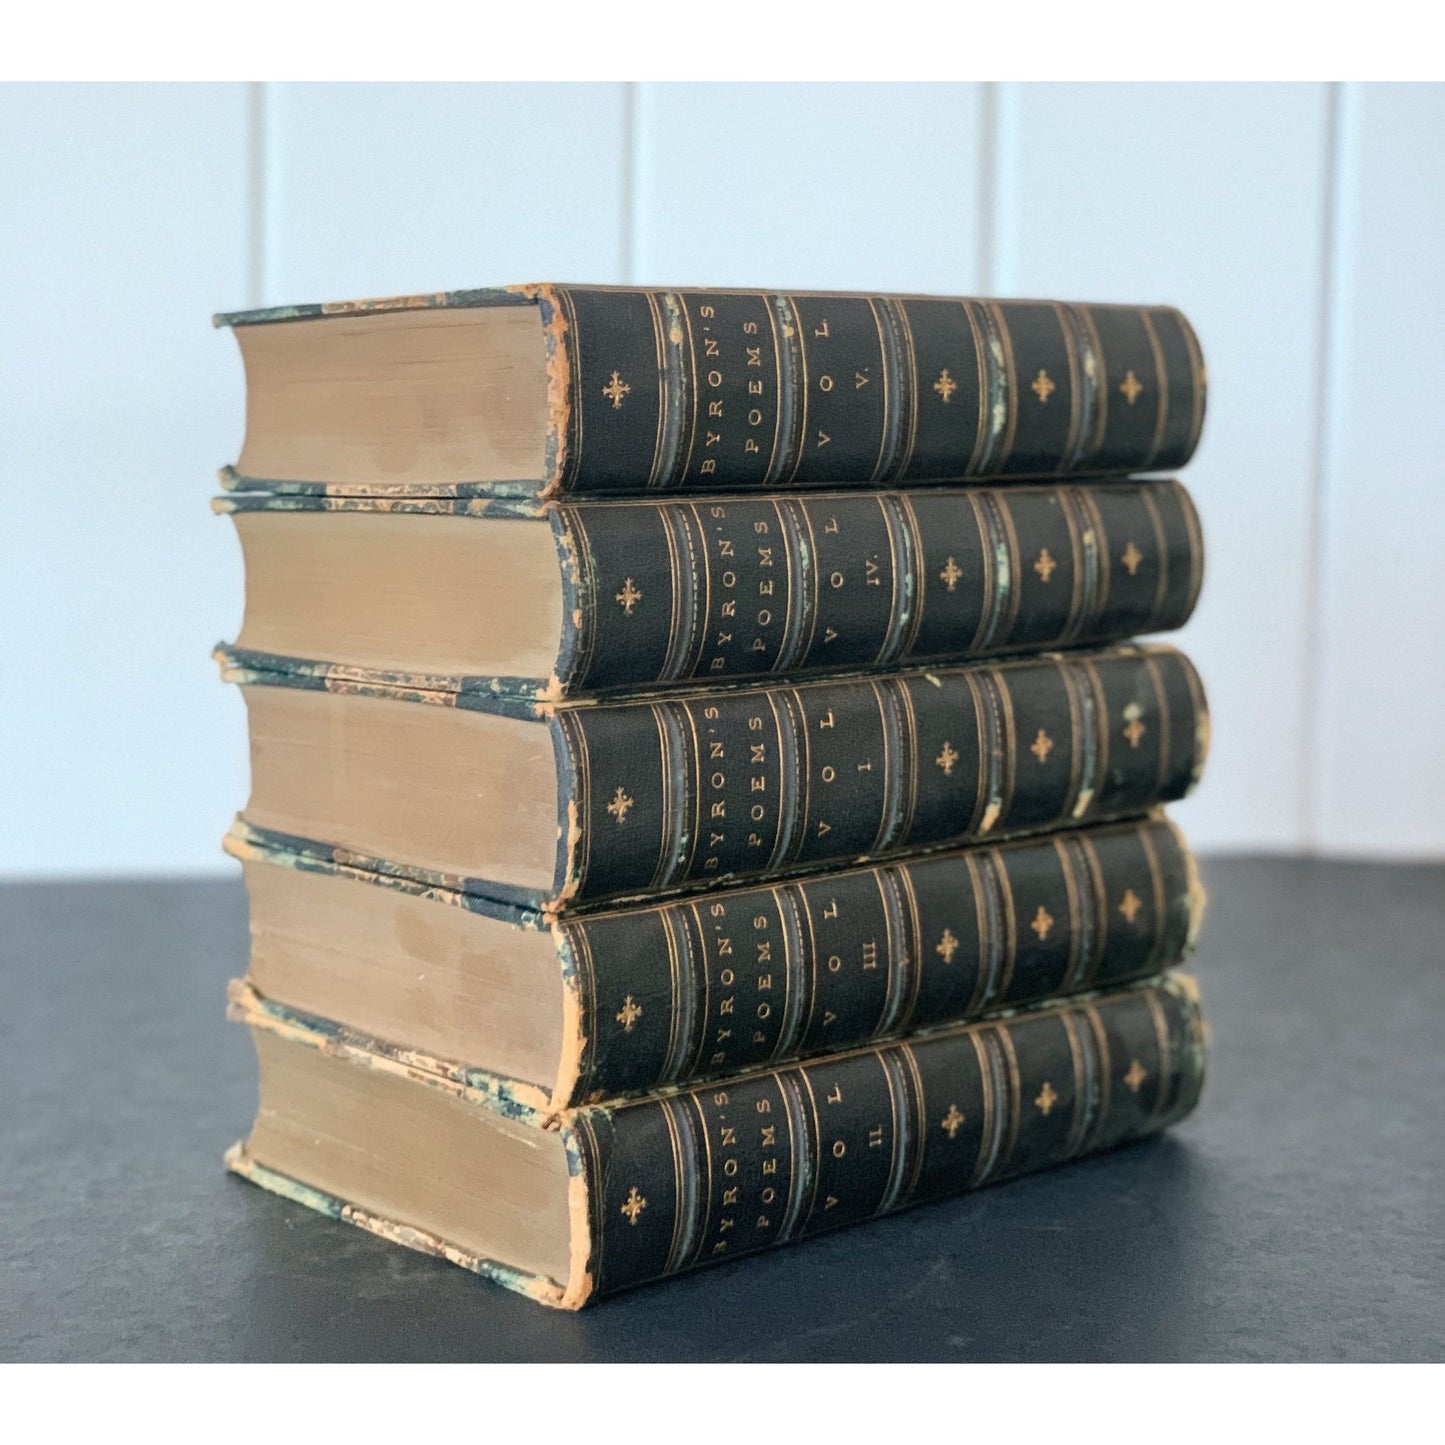 The Poetical Works of Lord Byron With a Memoir, 1860, Five Volume Set, Leather Bound